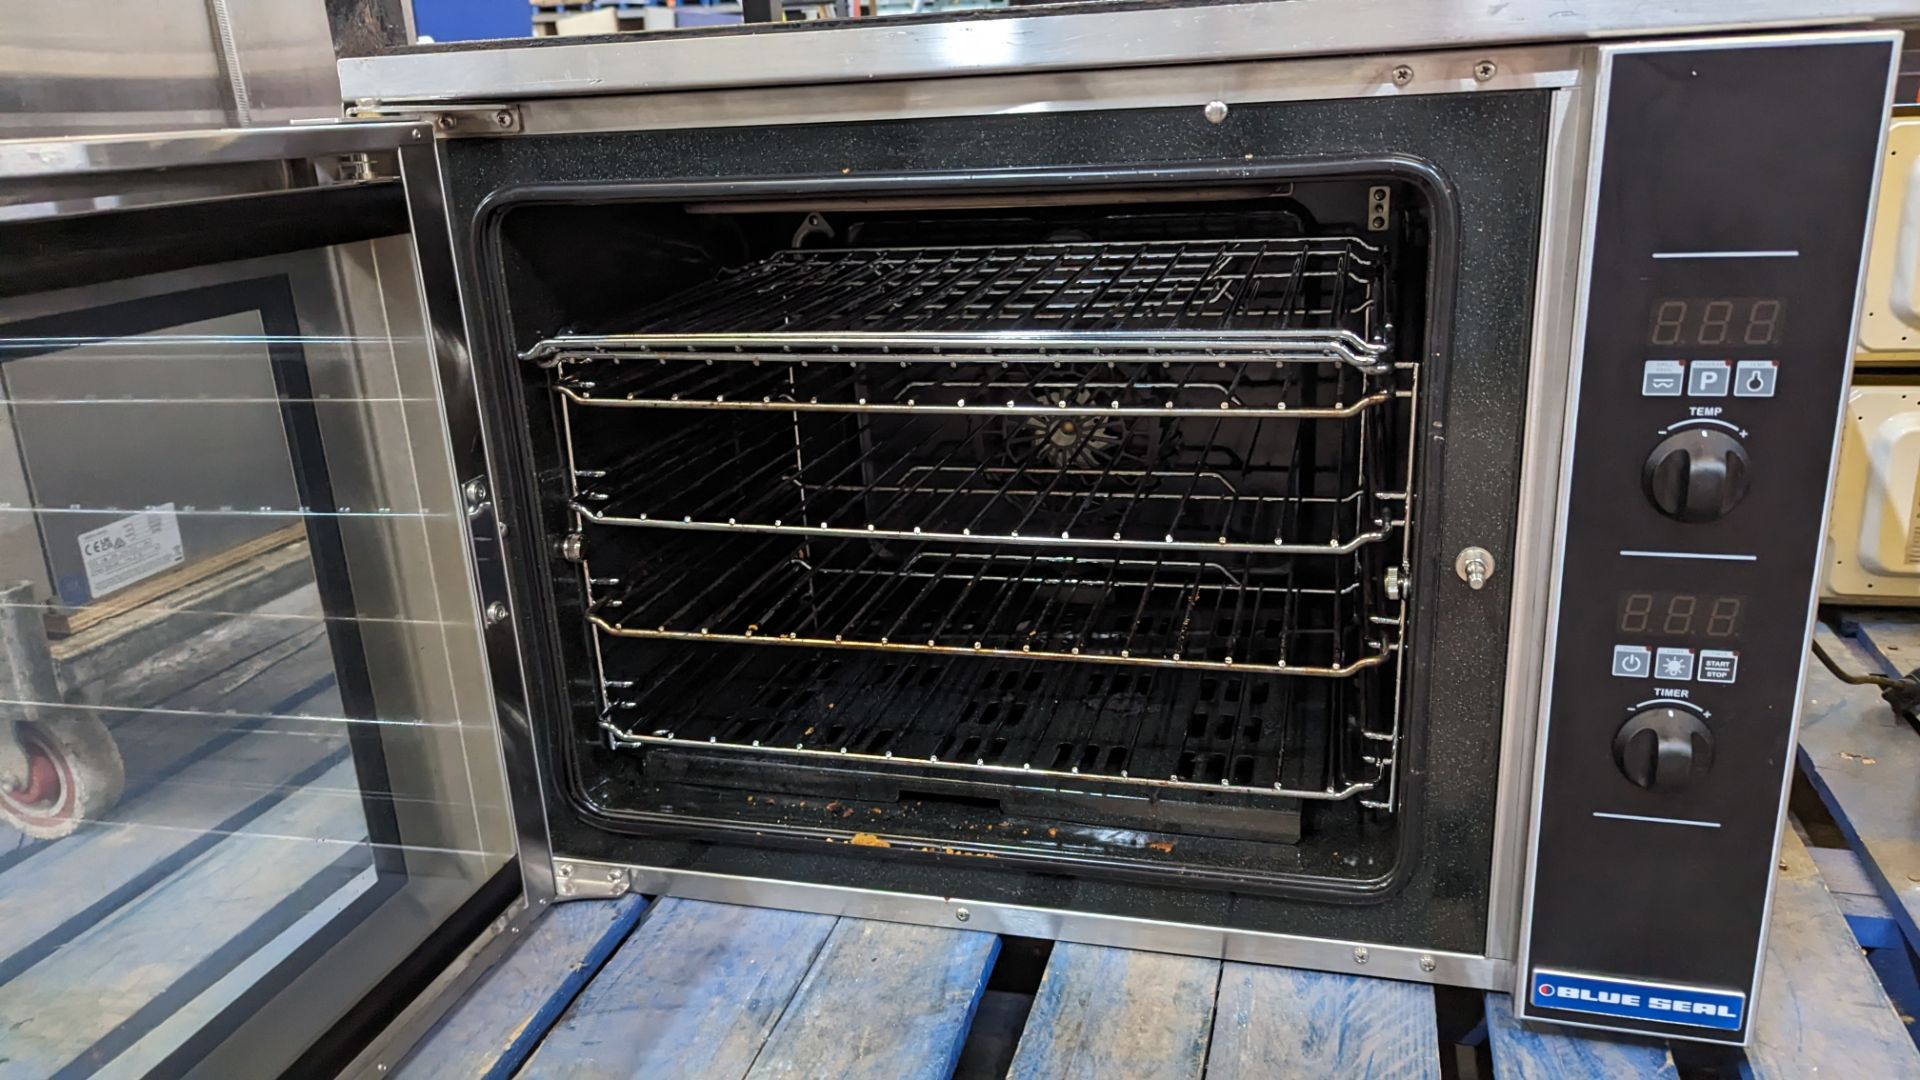 Blue Seal Turbofan convection oven model E31D4. Capacity for up to 4 full-size (1/1GN) Gastronorm p - Image 5 of 9